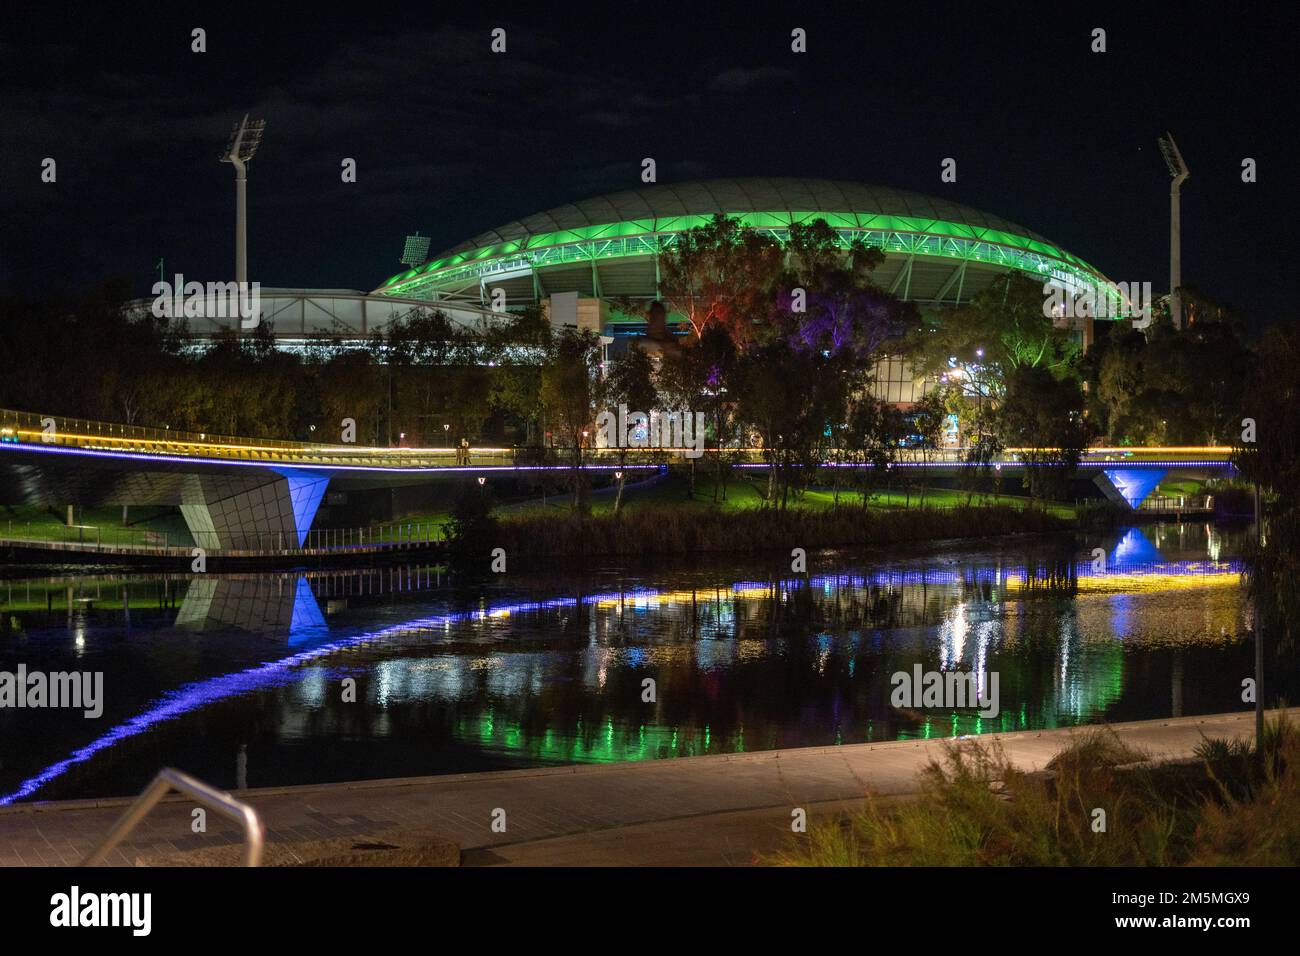 A night view of The Riverbank Precinct Pedestrian Bridge and oval football stadium in Adelaide Stock Photo